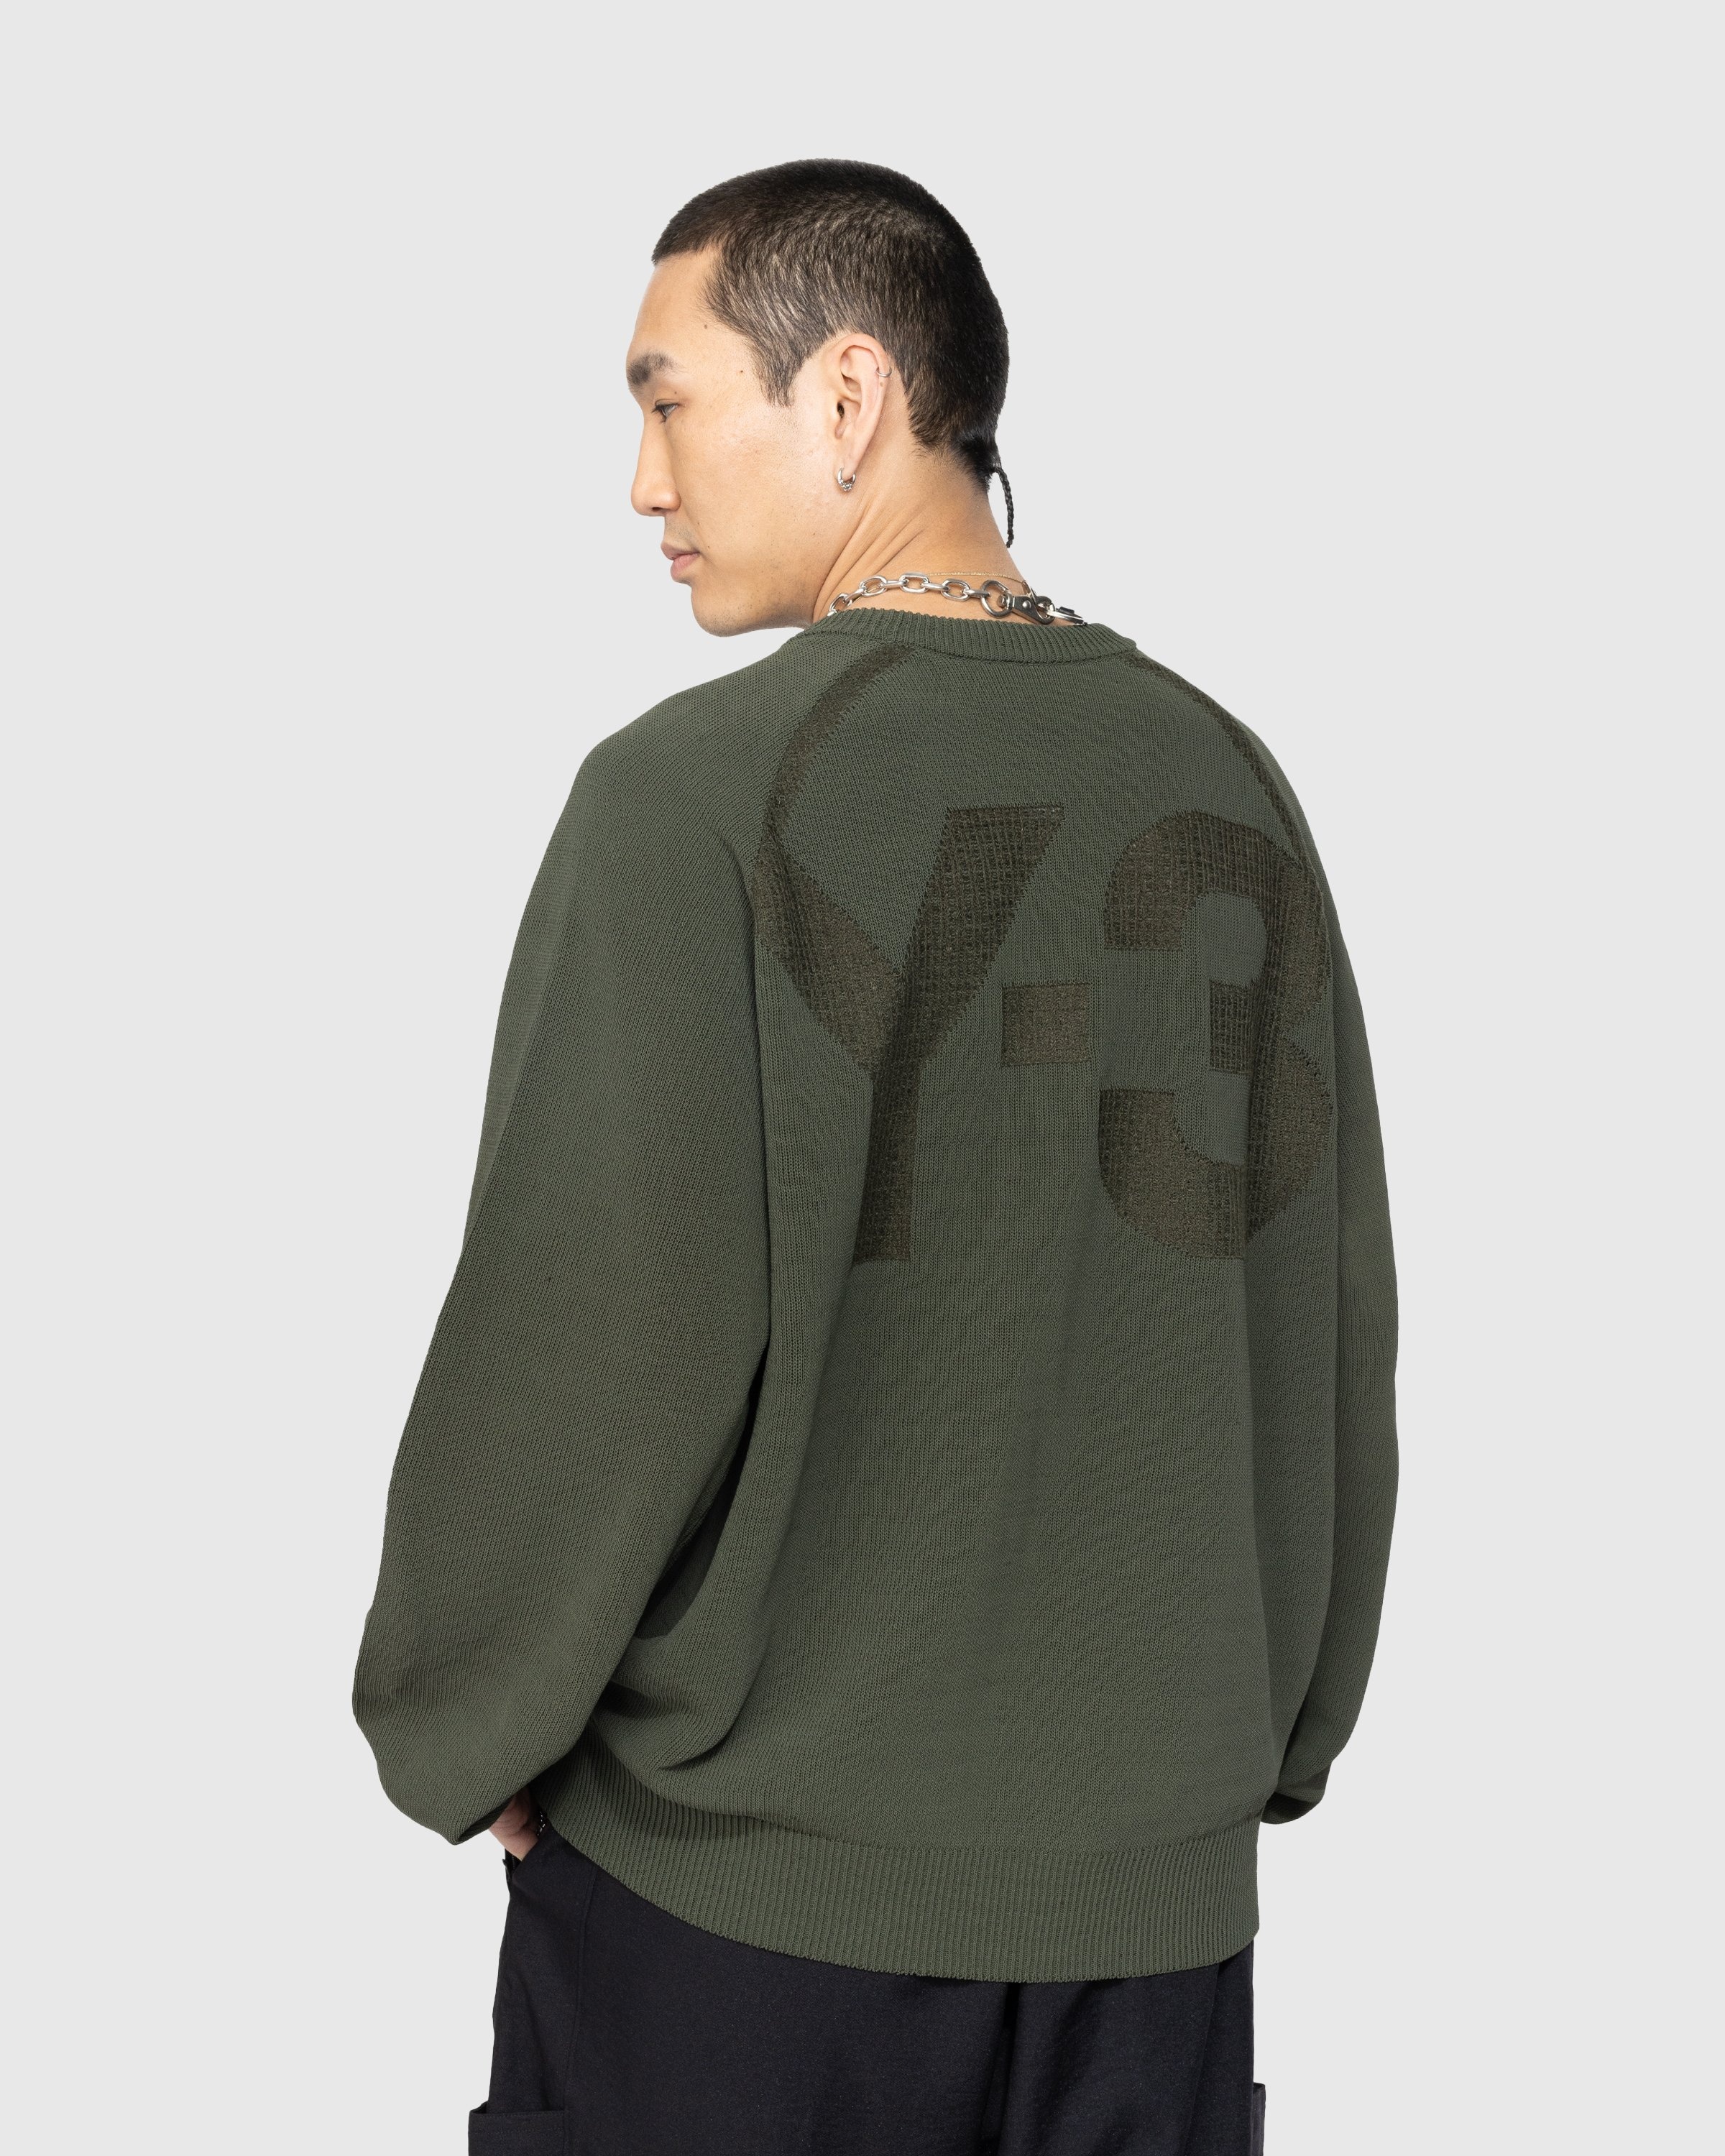 Y-3 – CL Knitted CR Sweater - Knitwear - Green - Image 3